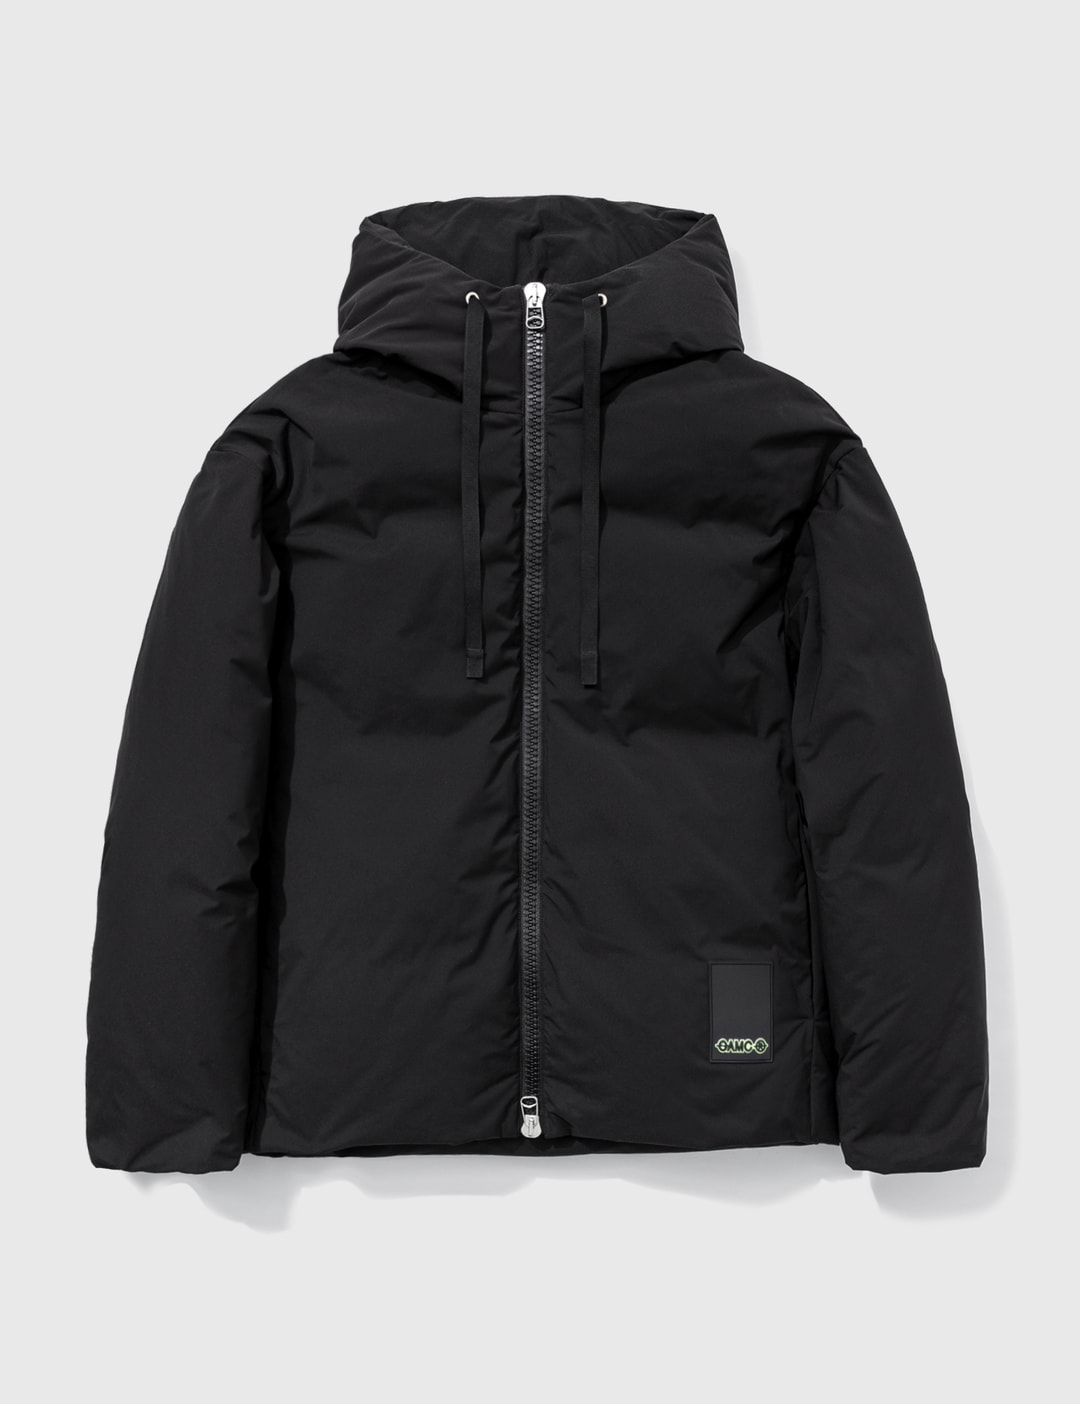 OAMC - Lithium Padded Jacket | HBX - Globally Curated Fashion and ...